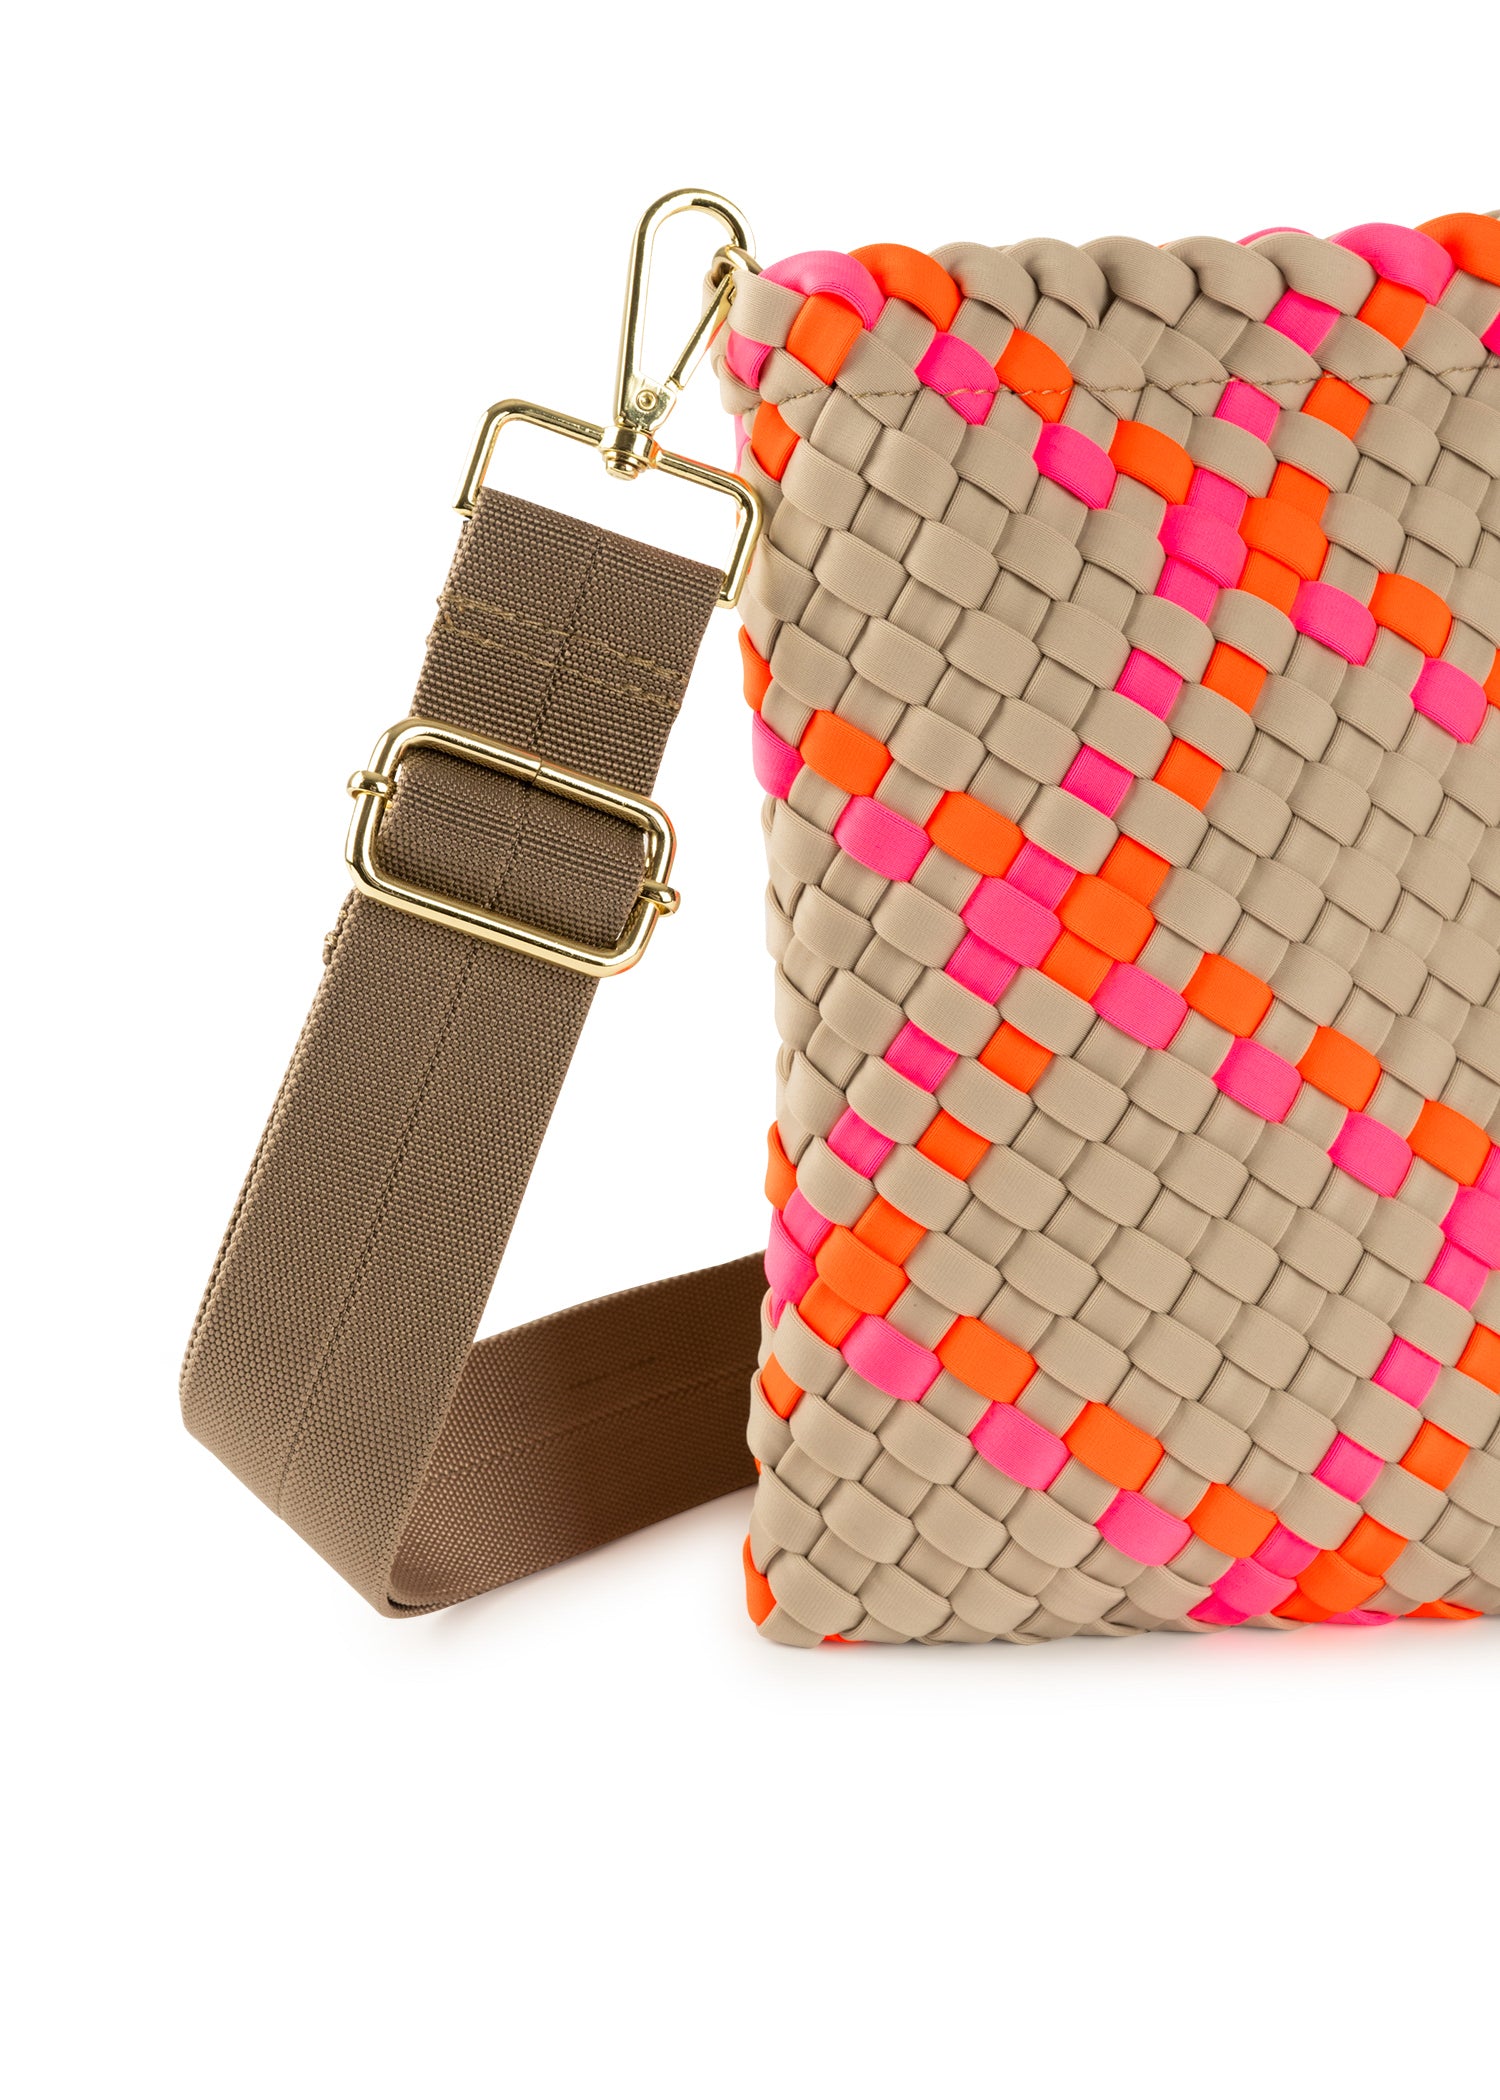 Shay Belize Woven Phone Bag